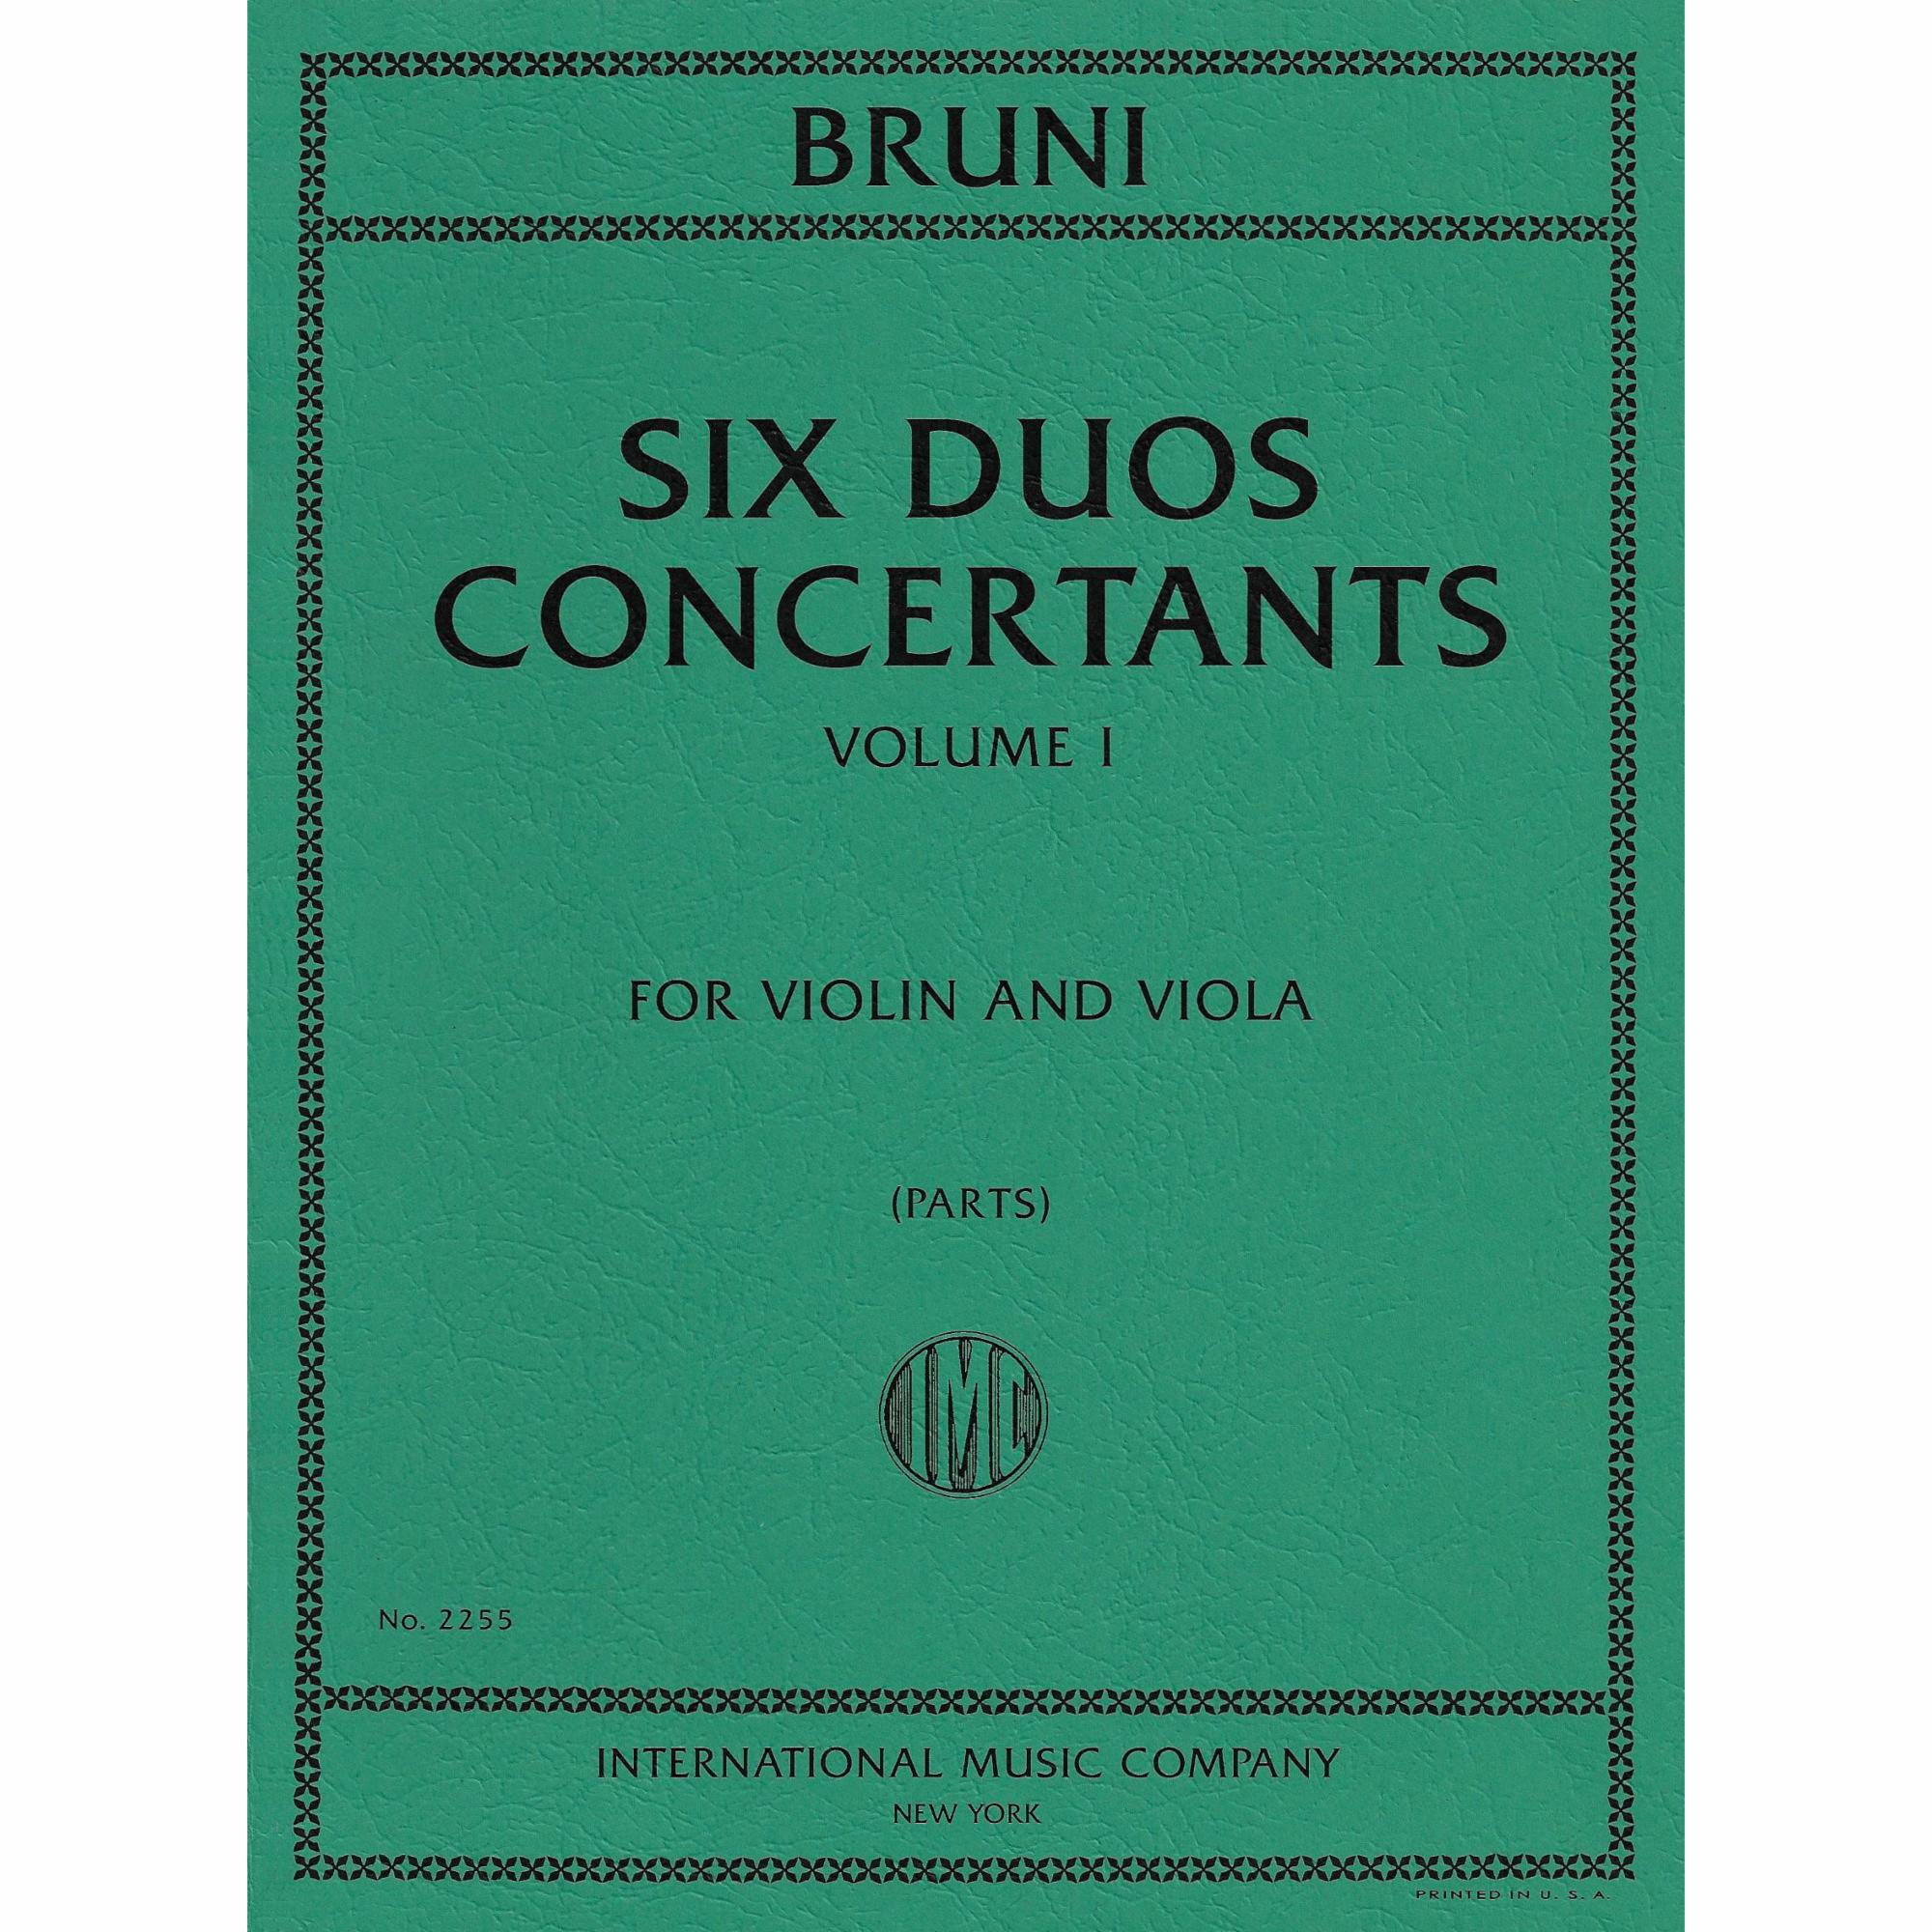 Bruni -- Six Duos Concertants, Op. 10, Volume I for Violin and Viola